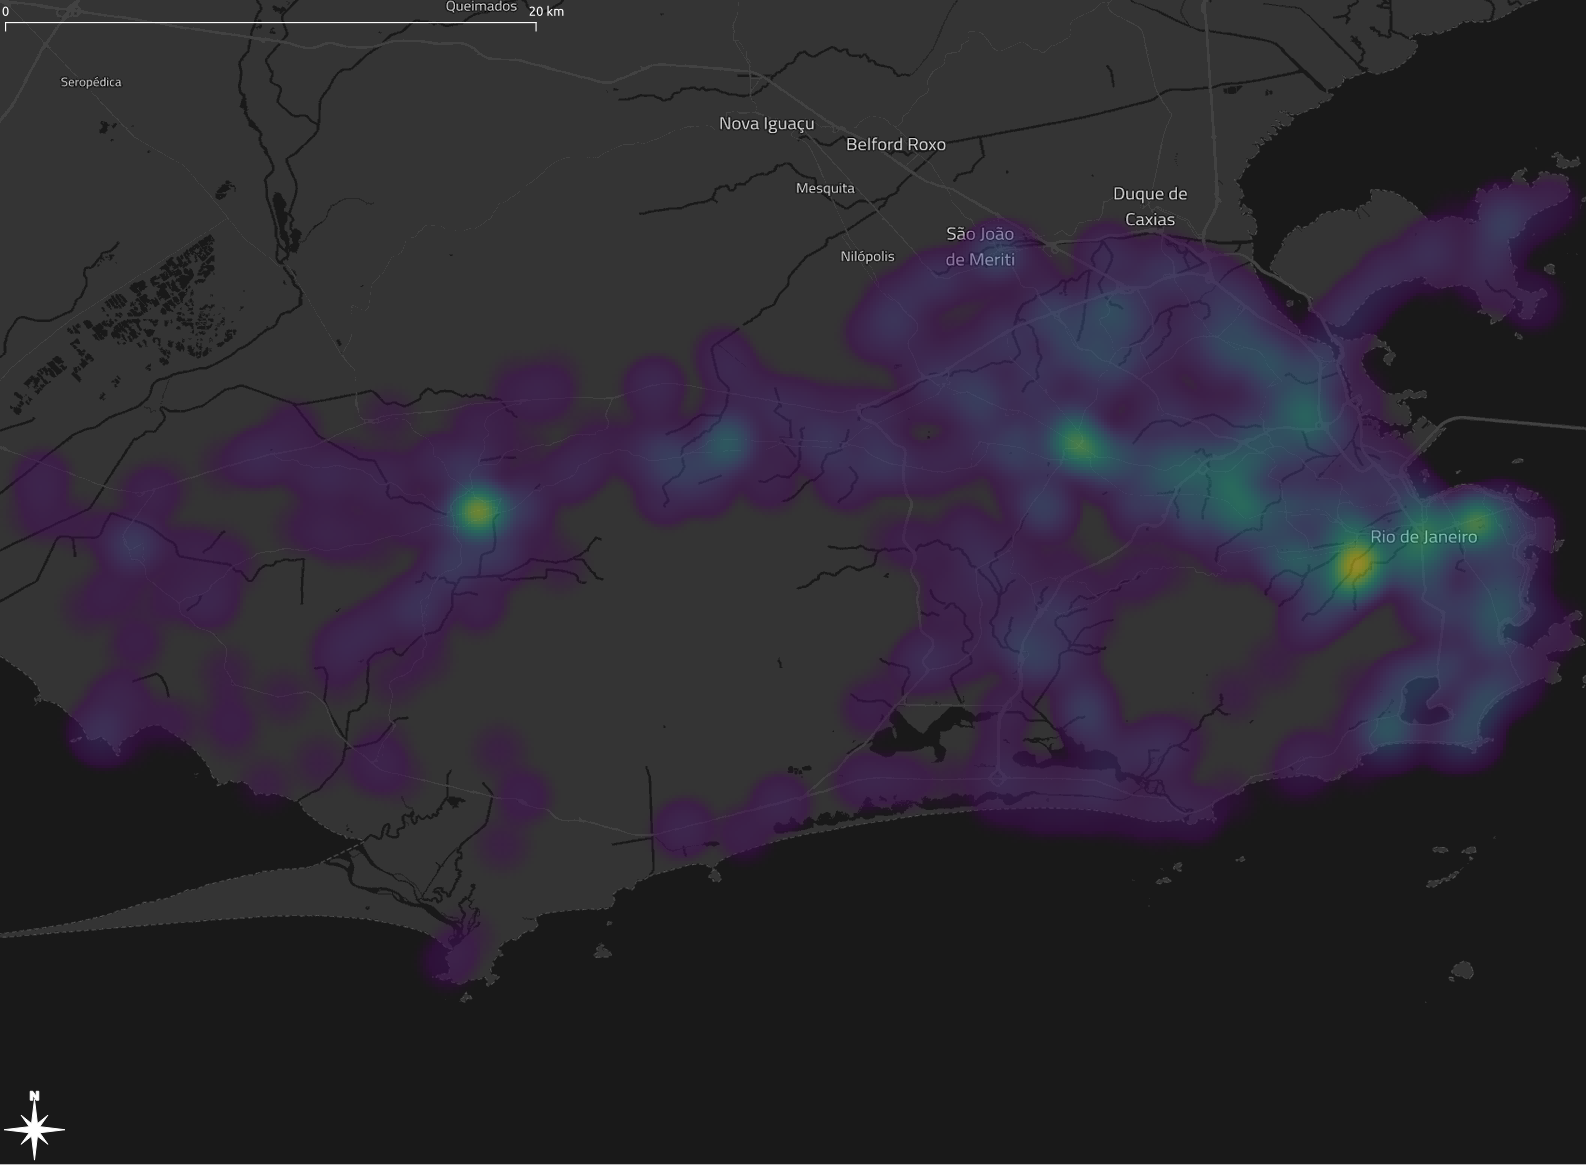 Map of the demo data showing a location heatmap of buses in the Rio de Janeiro region